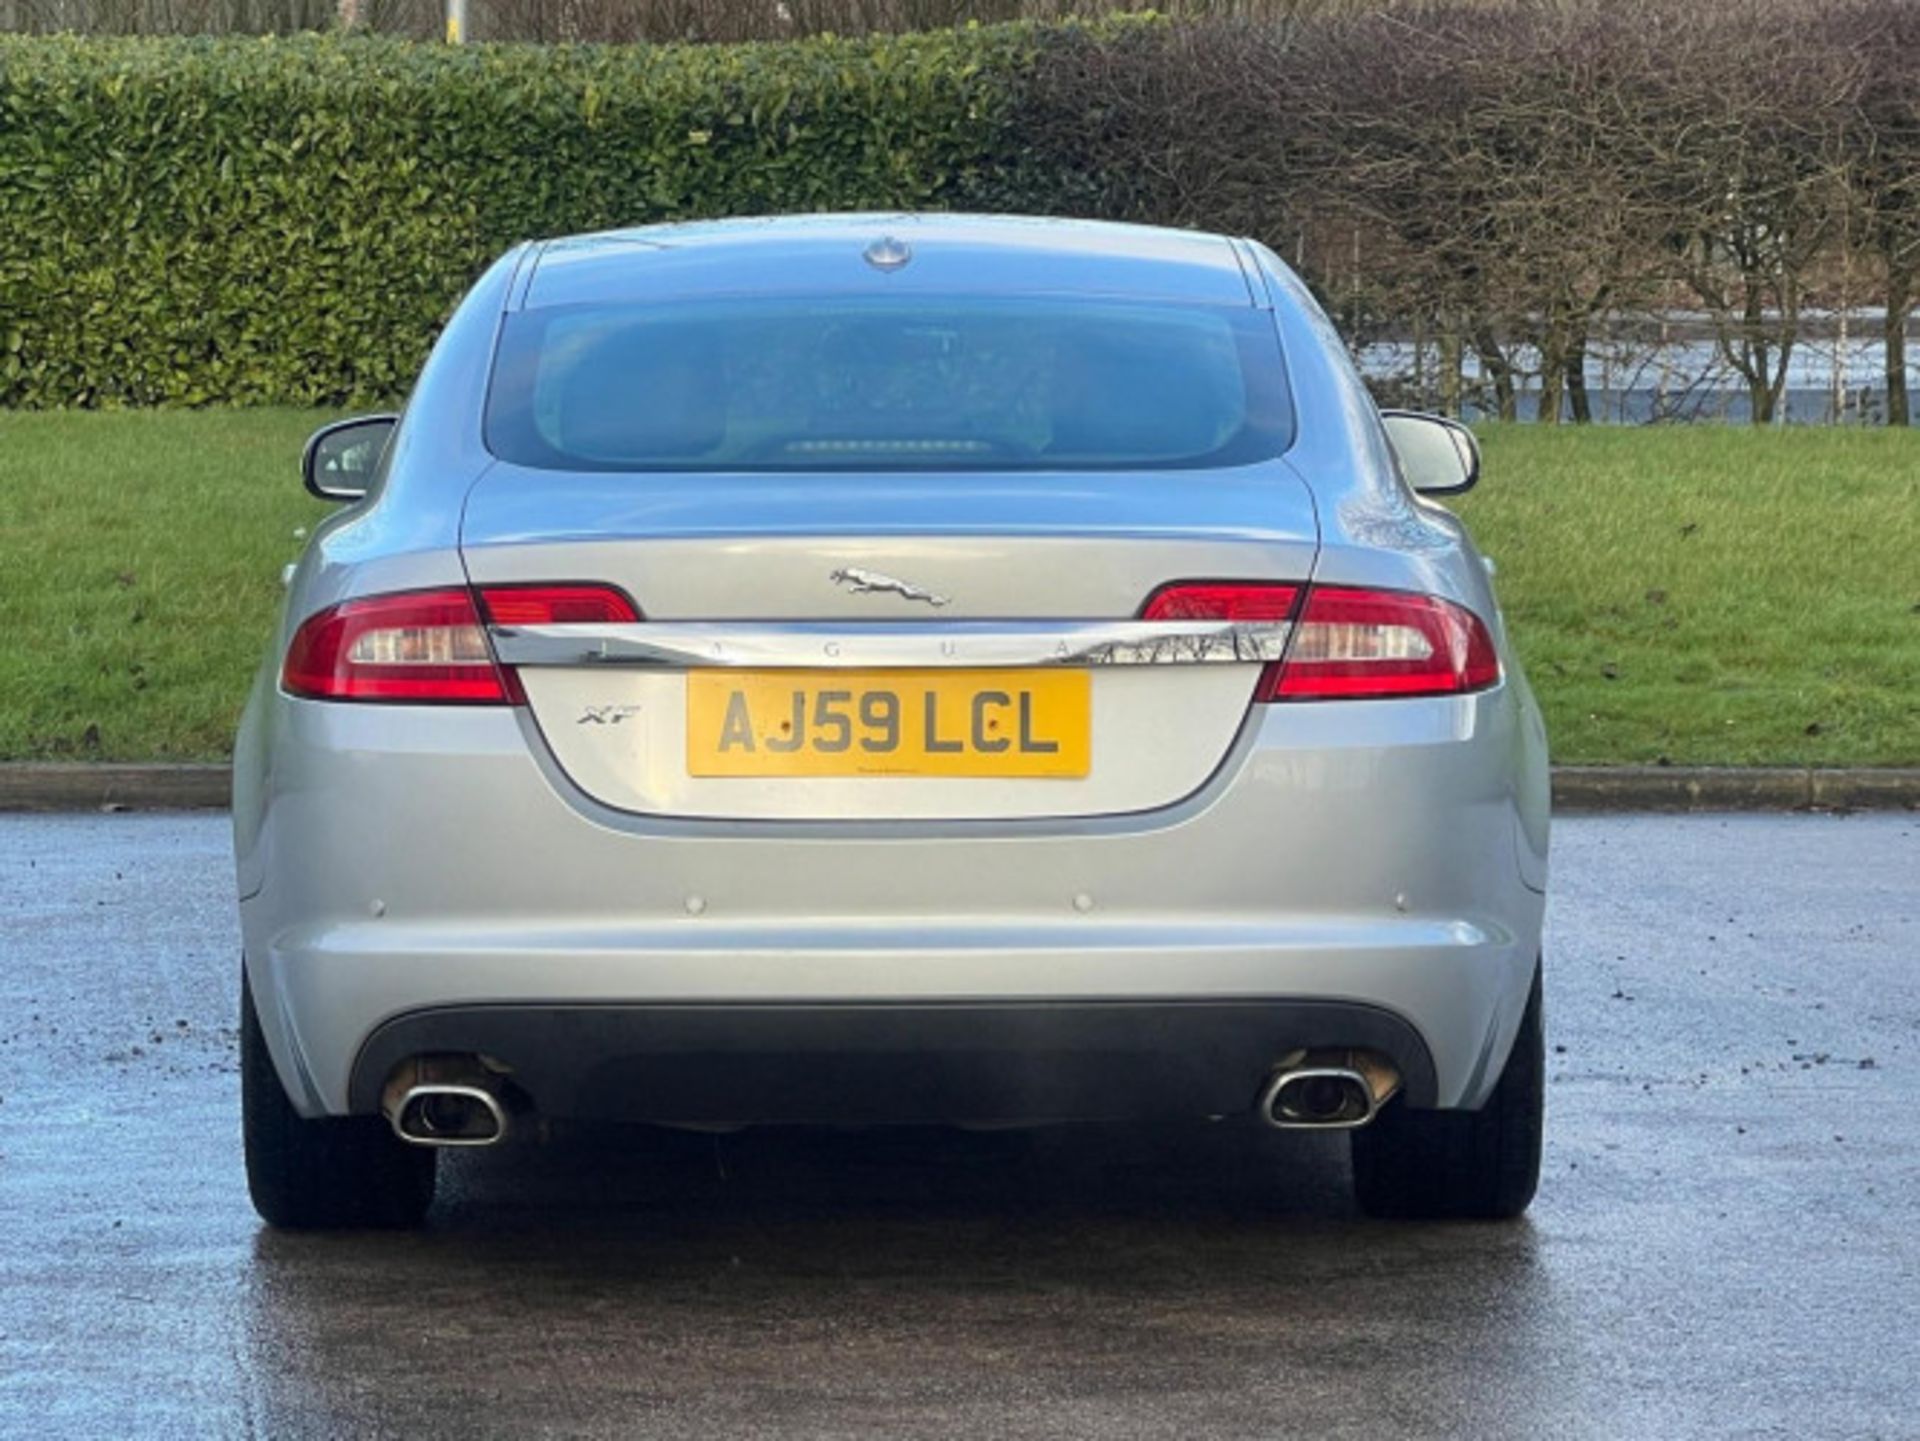 LUXURIOUS JAGUAR XF 3.0D V6 LUXURY 4DR AUTOMATIC SALOON >>--NO VAT ON HAMMER--<< - Image 78 of 80